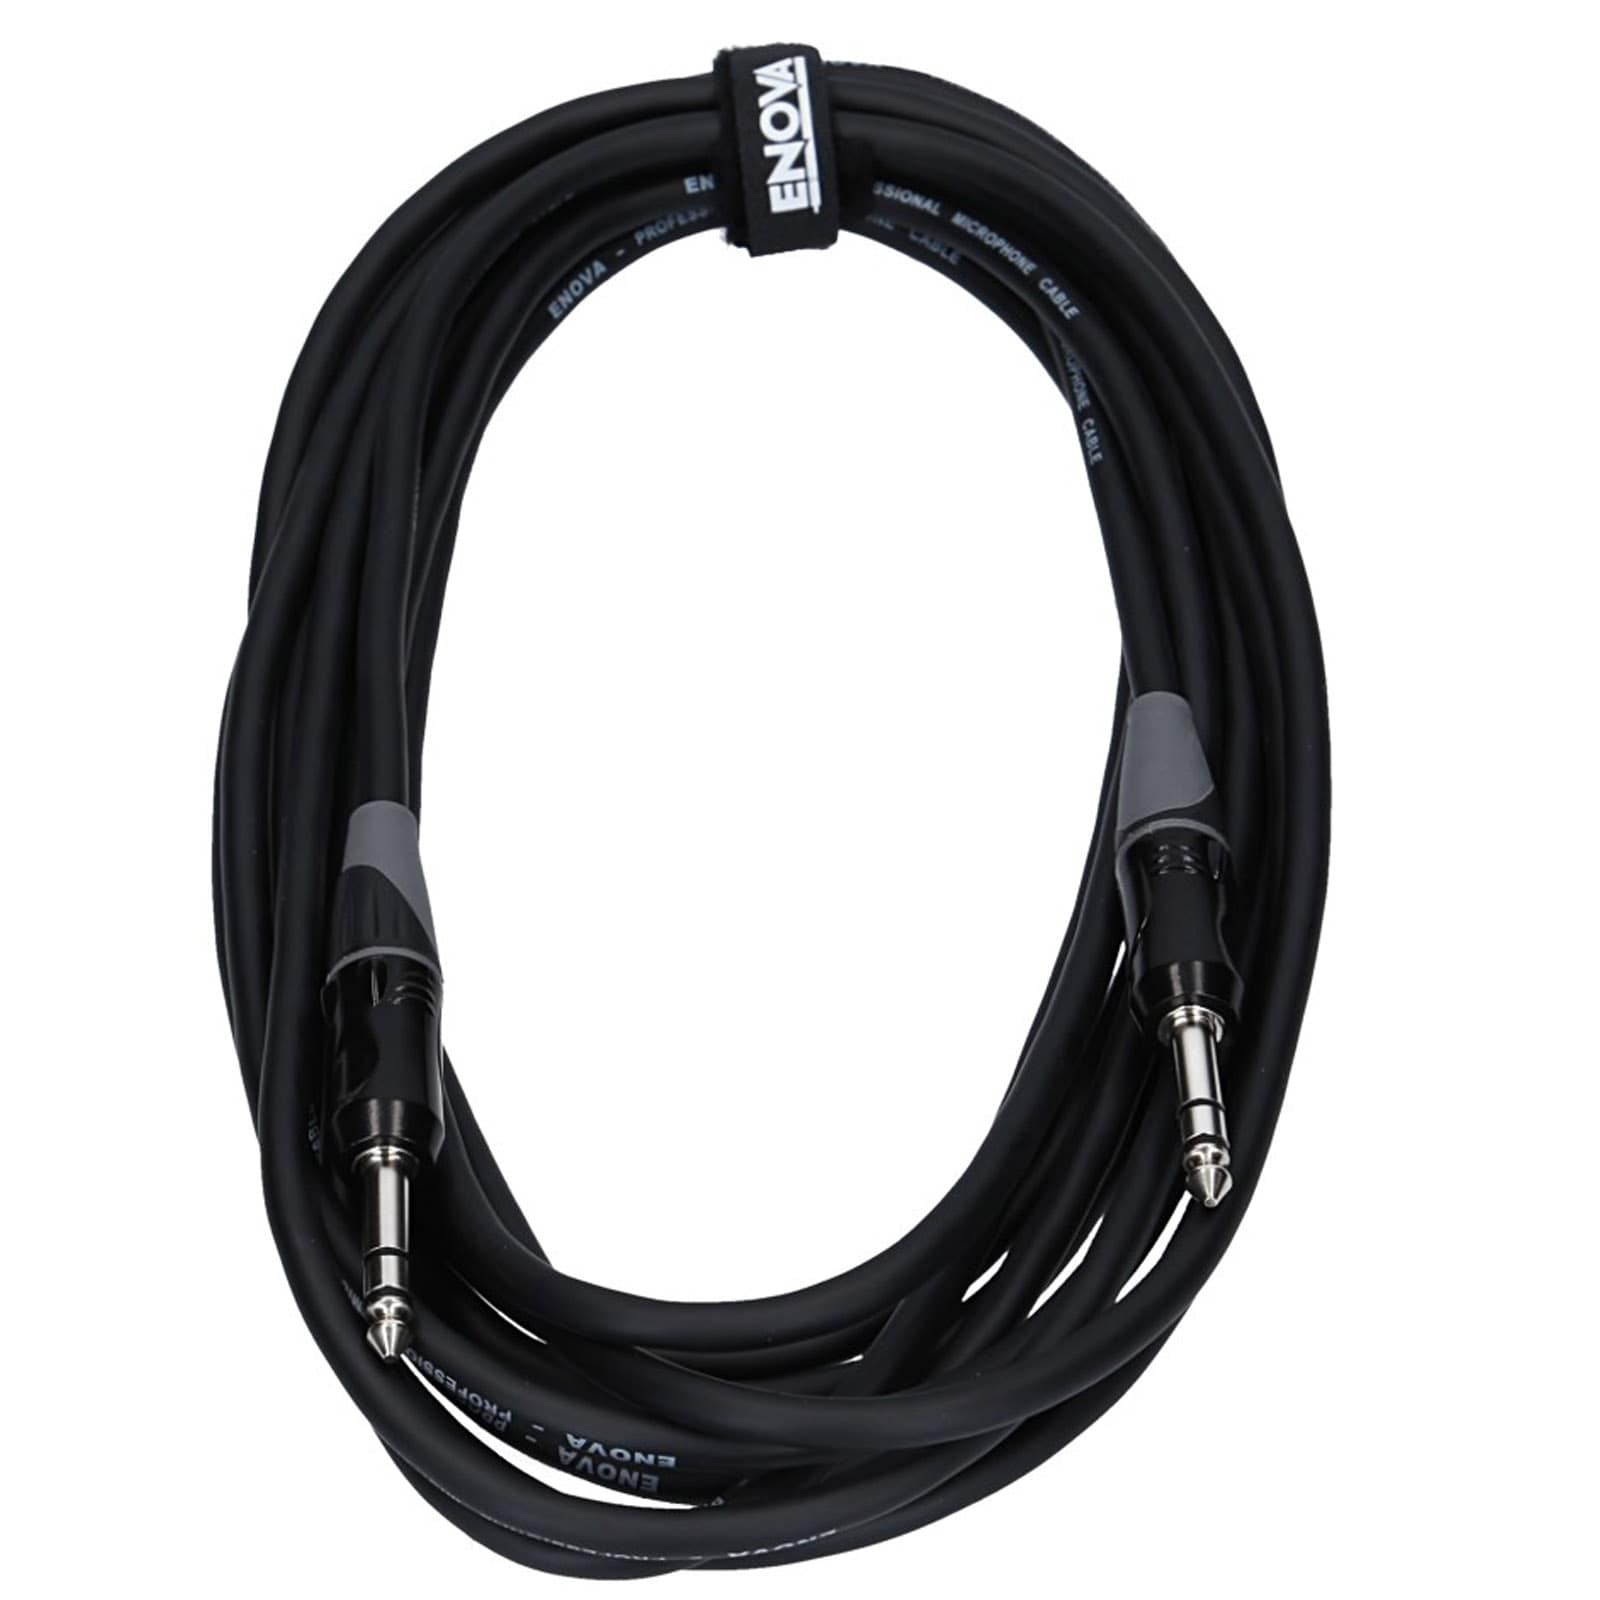 ENOVA, 2 meter jack cable, with 6.3 mm stereo jack connector | Enova Pro AV Connectors & Pro AV Interconnect Cables